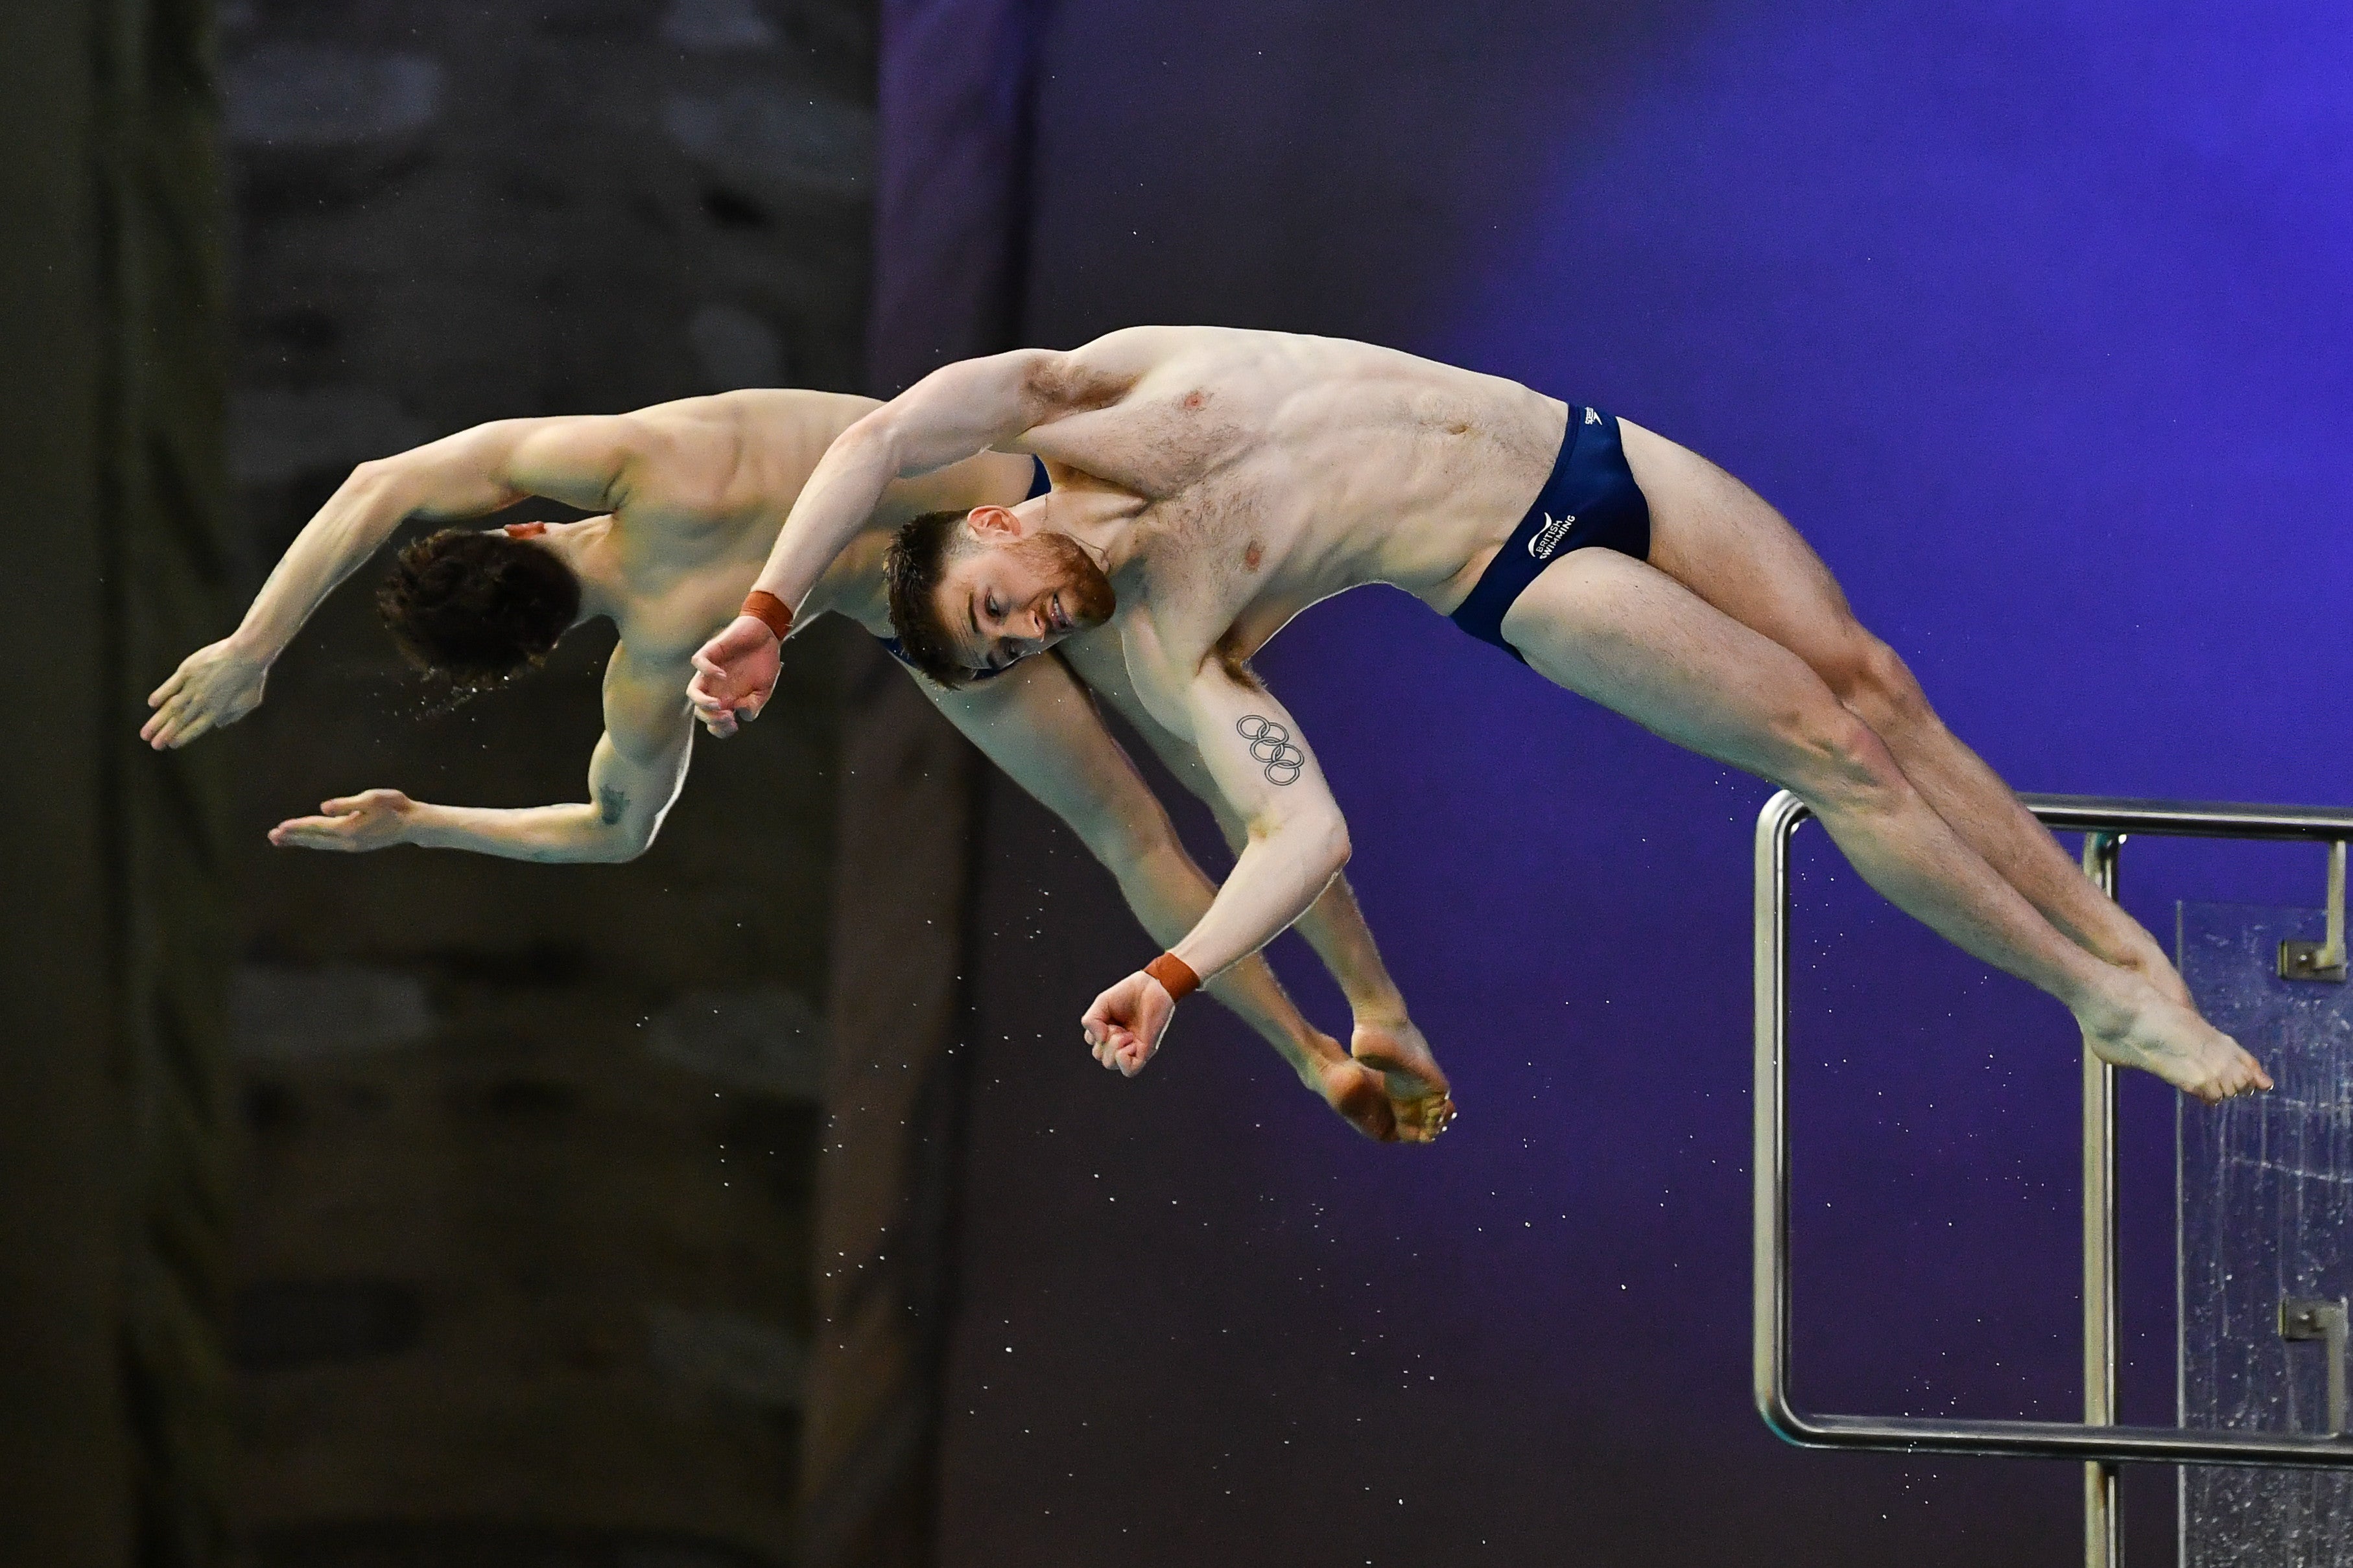 Matty Lee and Noah Williams are forming a burgeoning partnership in the 10m synchro